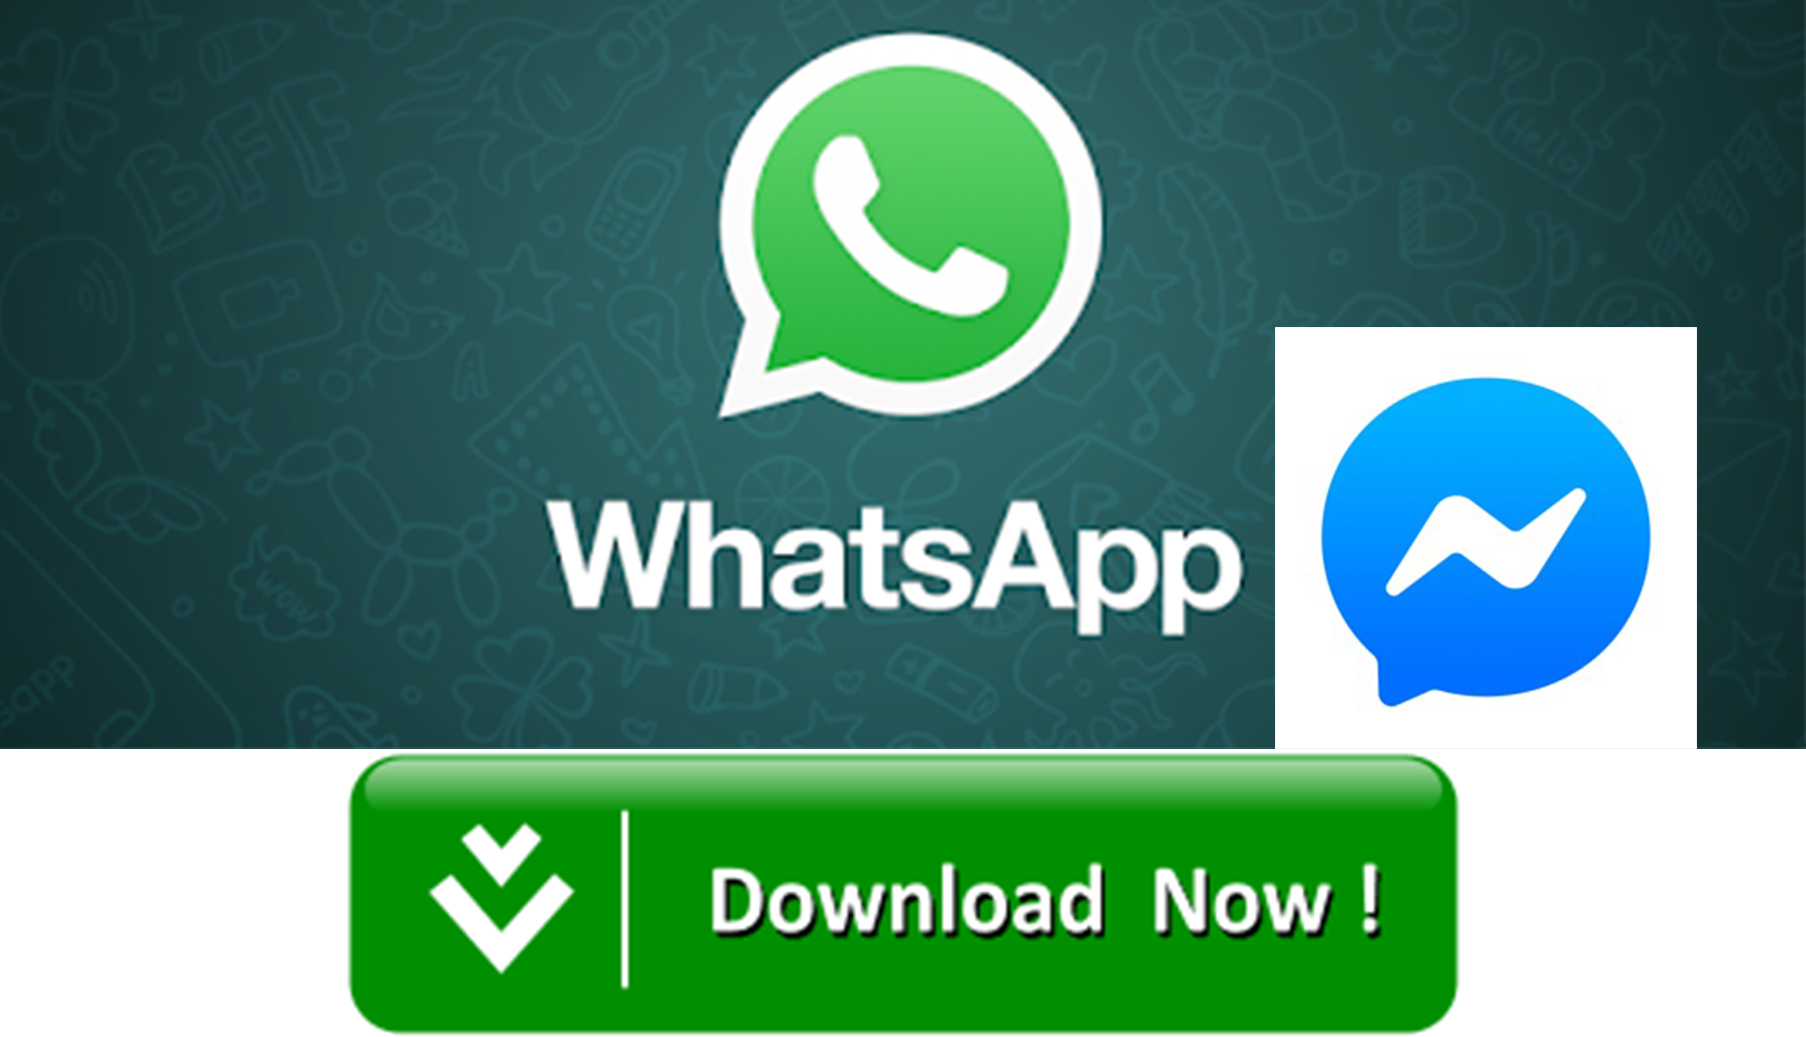 whatsapp business for pc free download